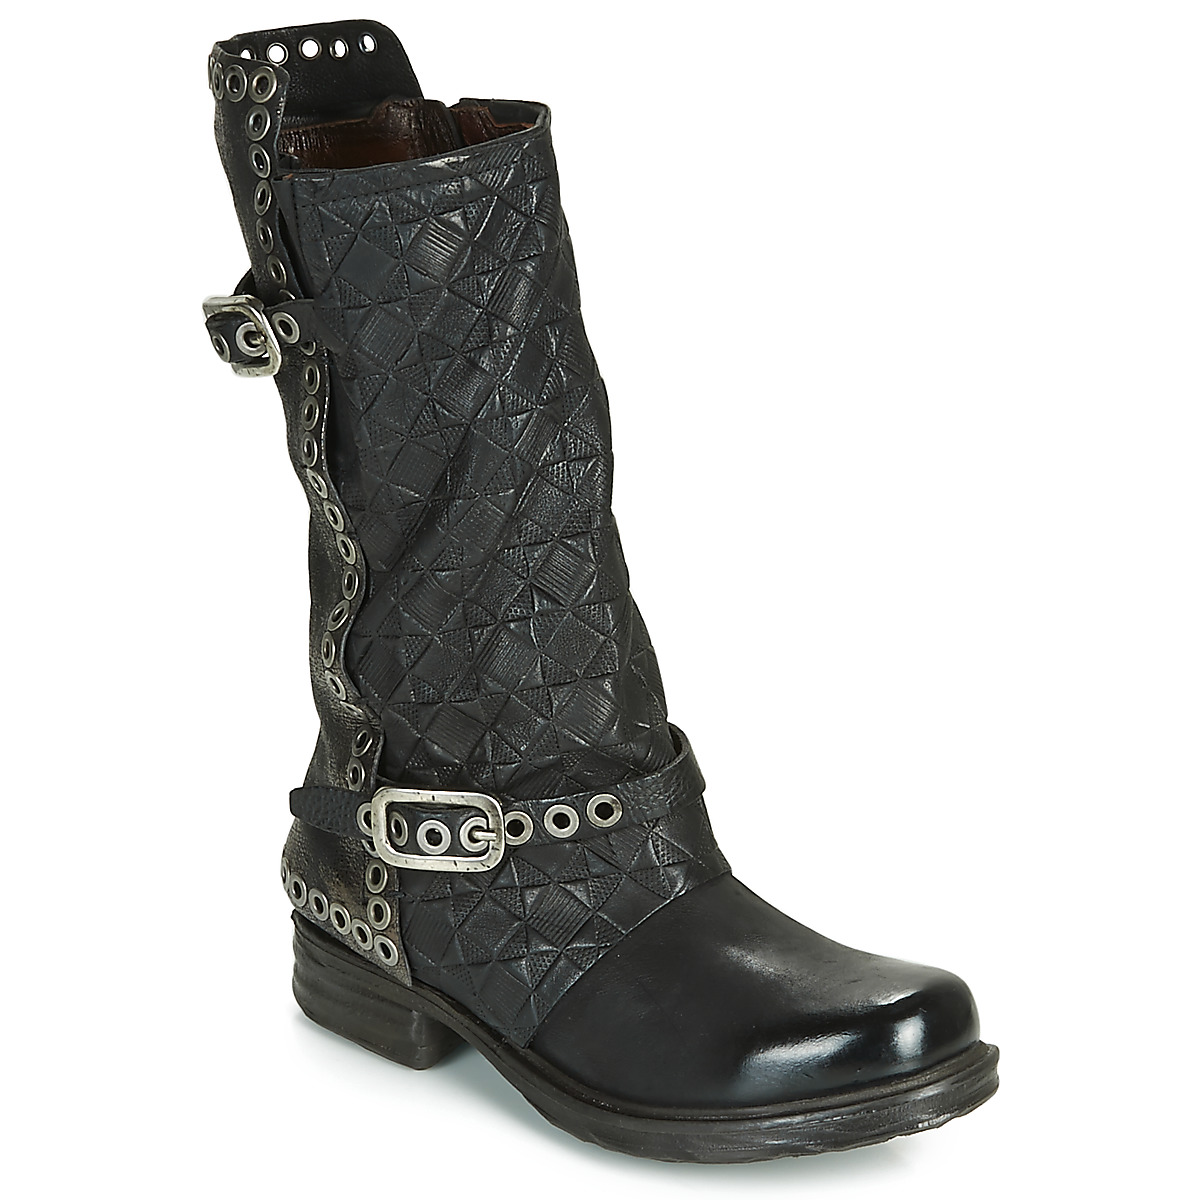 airstep / a.s.98  saint ec buckle  women's high boots in black